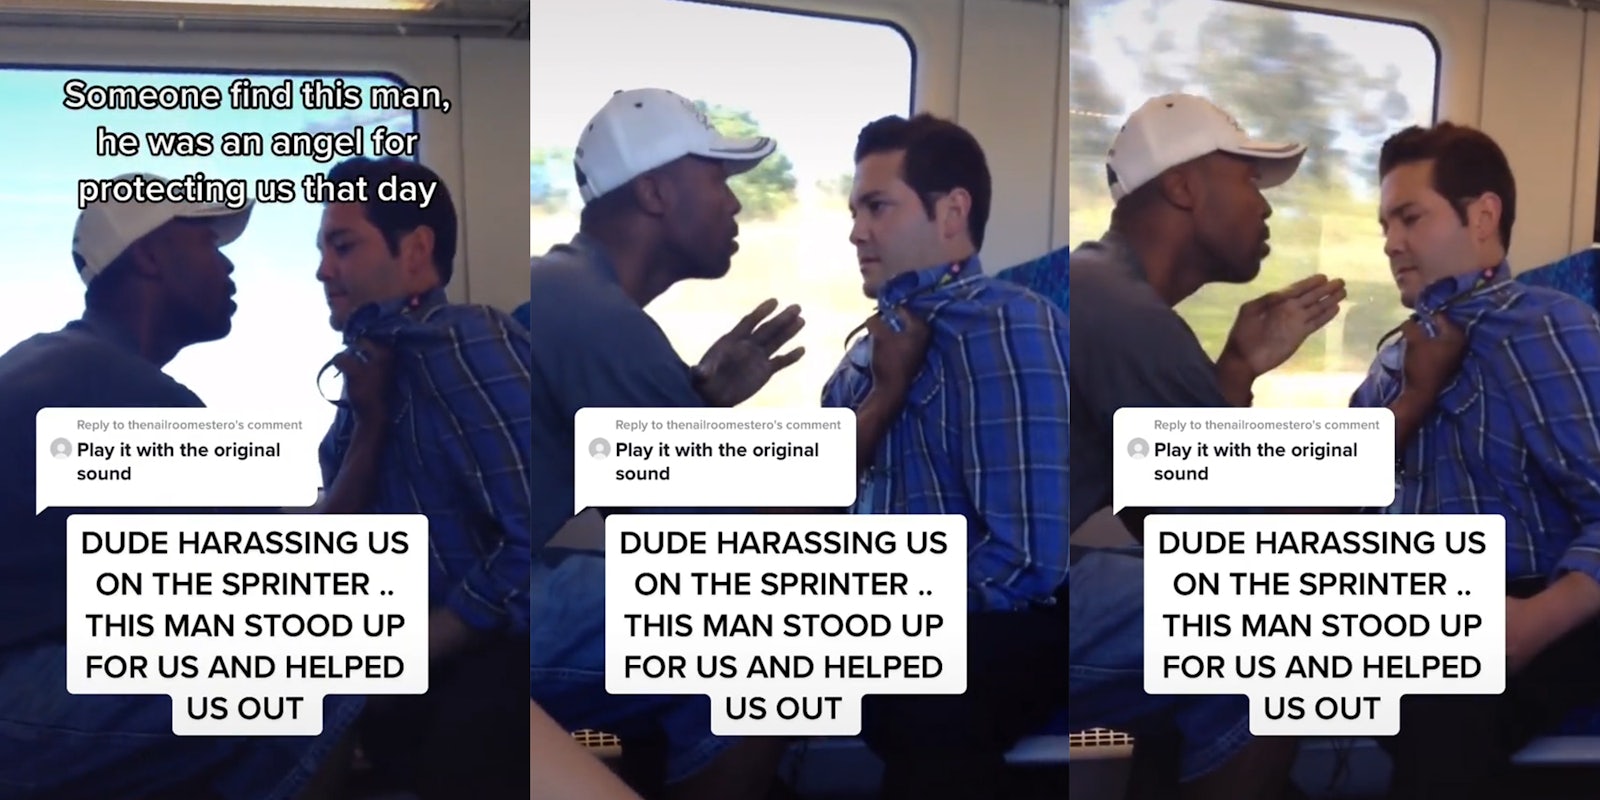 man confronts another man on train with captions 'Someone find this man, he was an angel for protecting us that day', 'Play it with the original sound' and 'Dude harassing us on the sprinter.. This man stood up for us and helped us out'